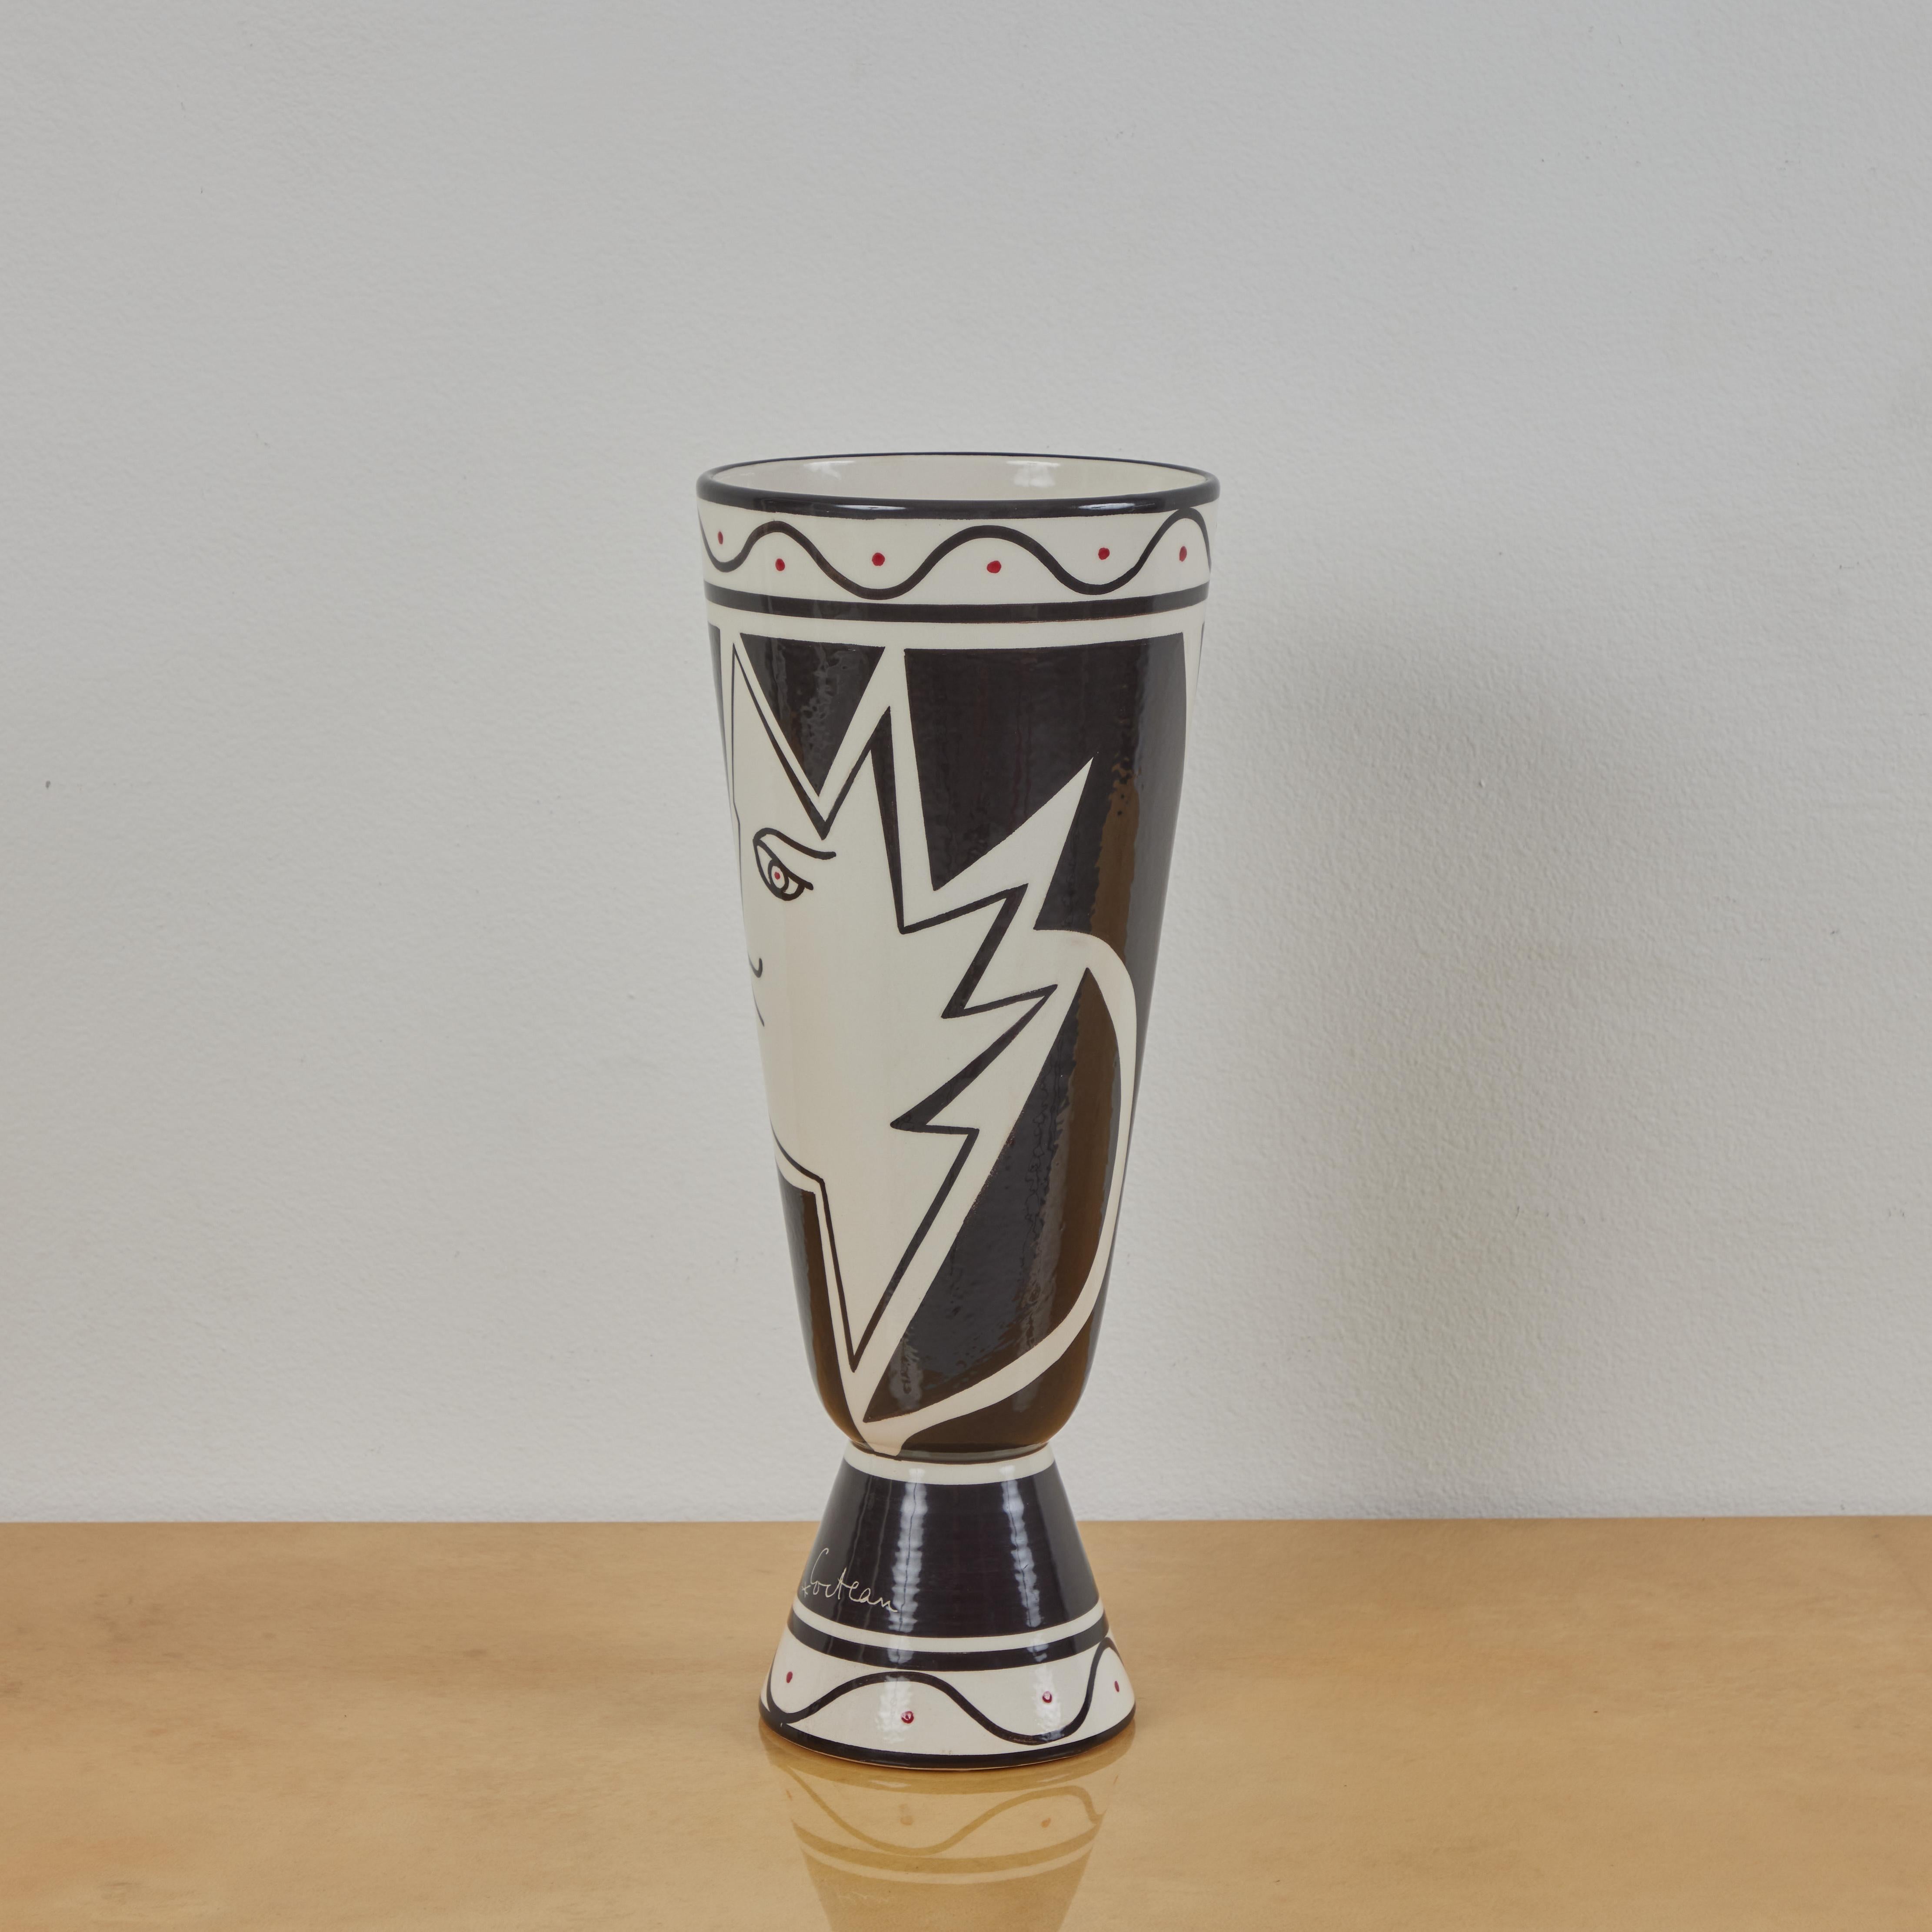 This is a decorated vase produced by Roche Bobois in the 2010s. The vase utilizes a design Jean Cocteau produced in the early 1960s. It features 2 geometric profiles with additional details painted in red. This is a limited edition of 1,000 produced